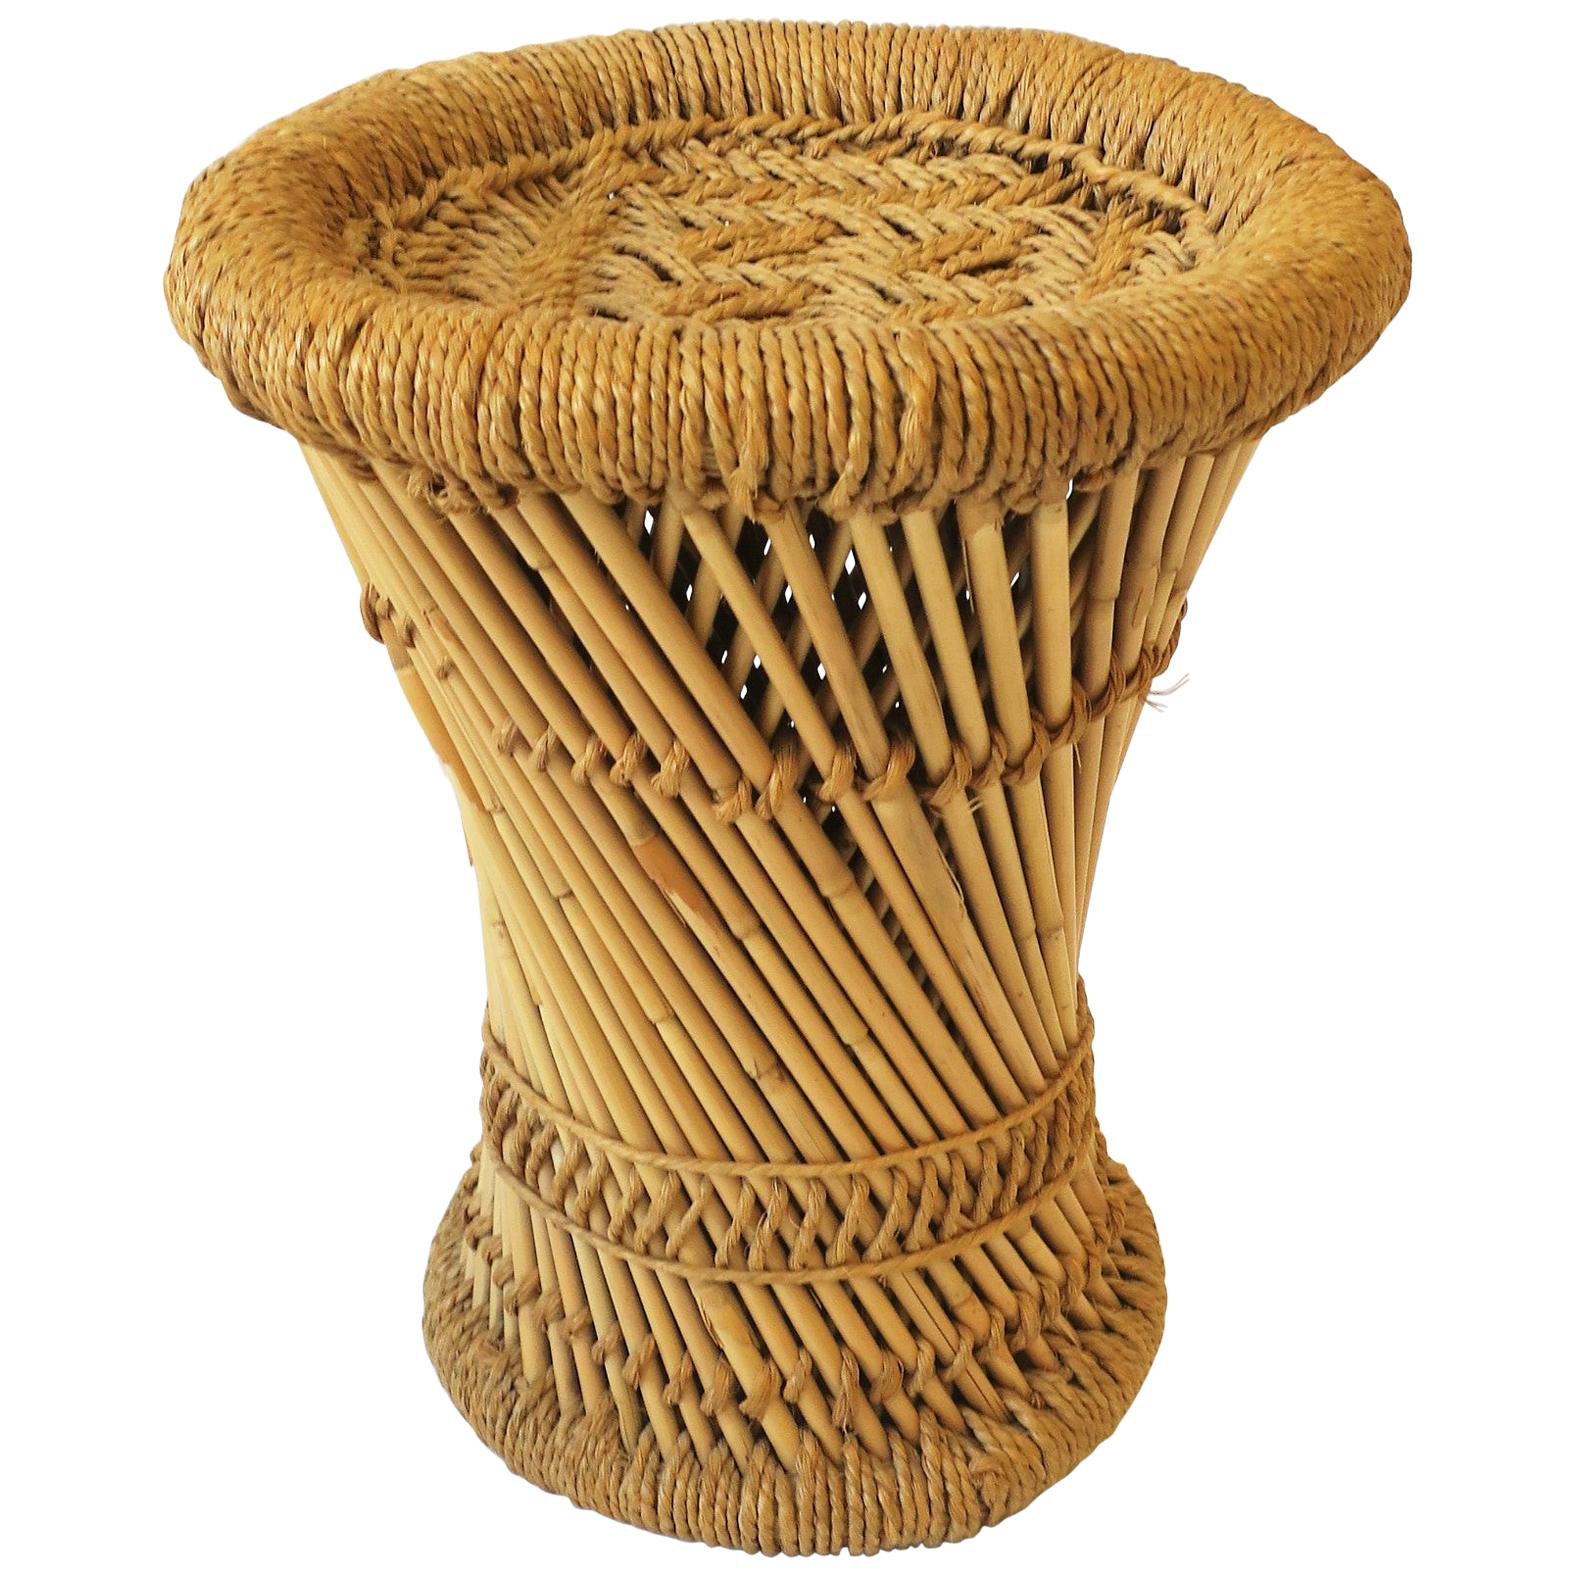 Wicker Pencil Reed Stool or Side Table with Glass Top, Small